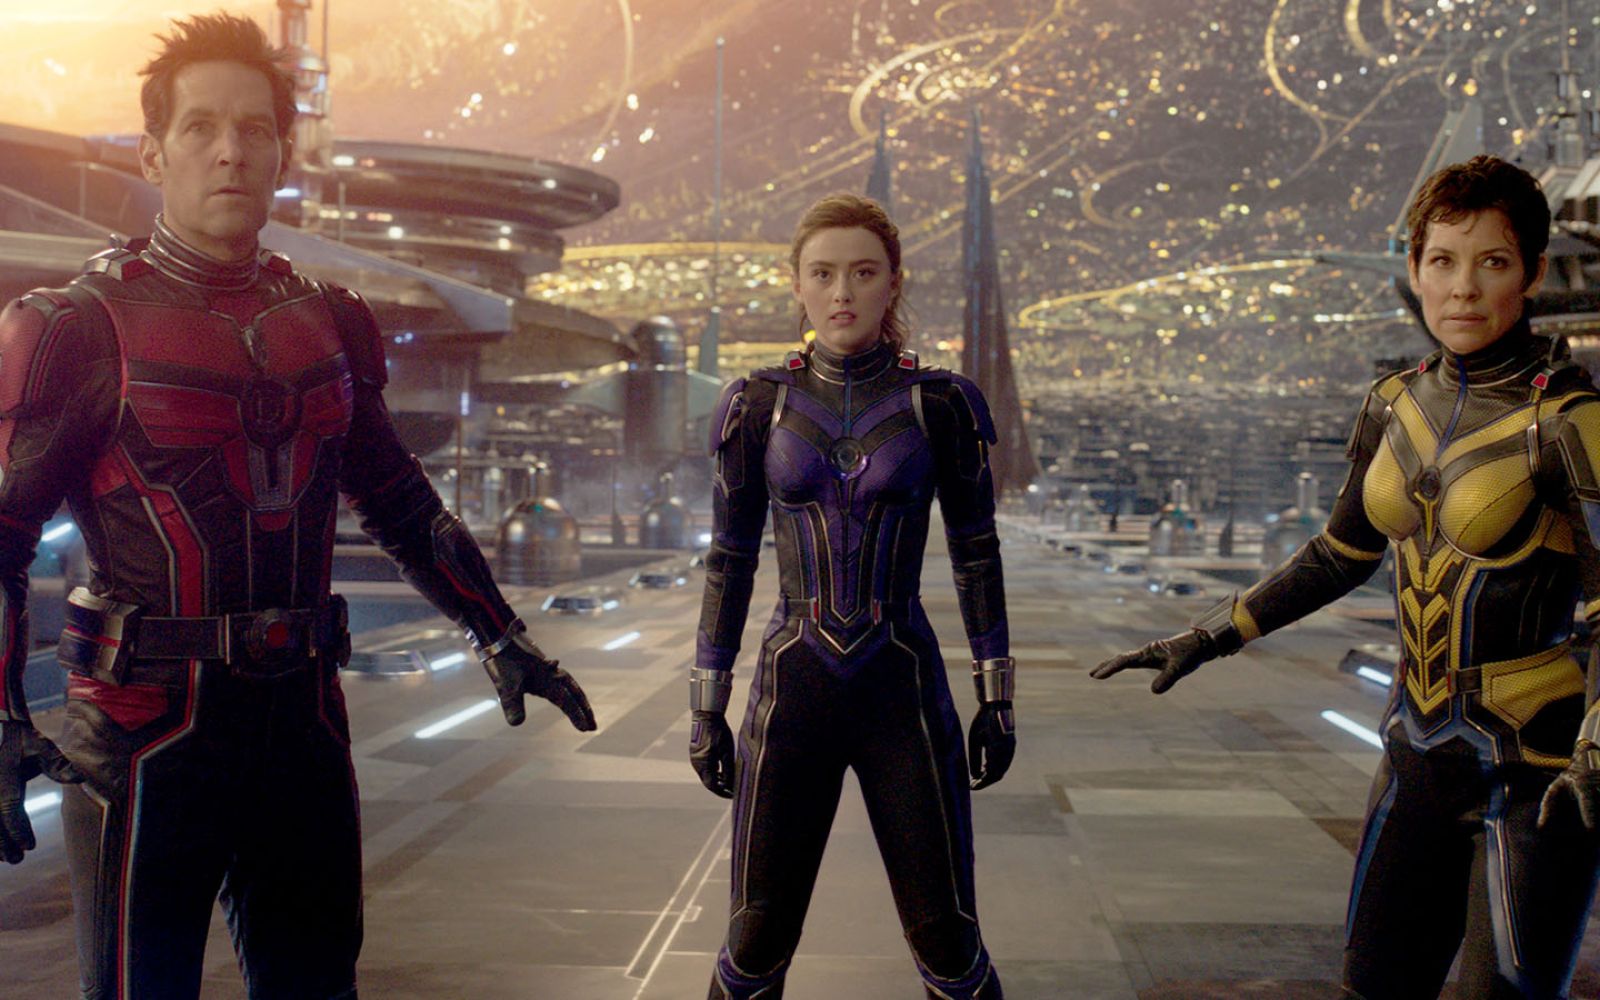 The Marvel Cinematic Universe scored another No. 1 movie with Ant-Man and The Wasp: Quantumania, starring, from left, Paul Rudd, Kathryn Newton, and Evangeline Lilly.